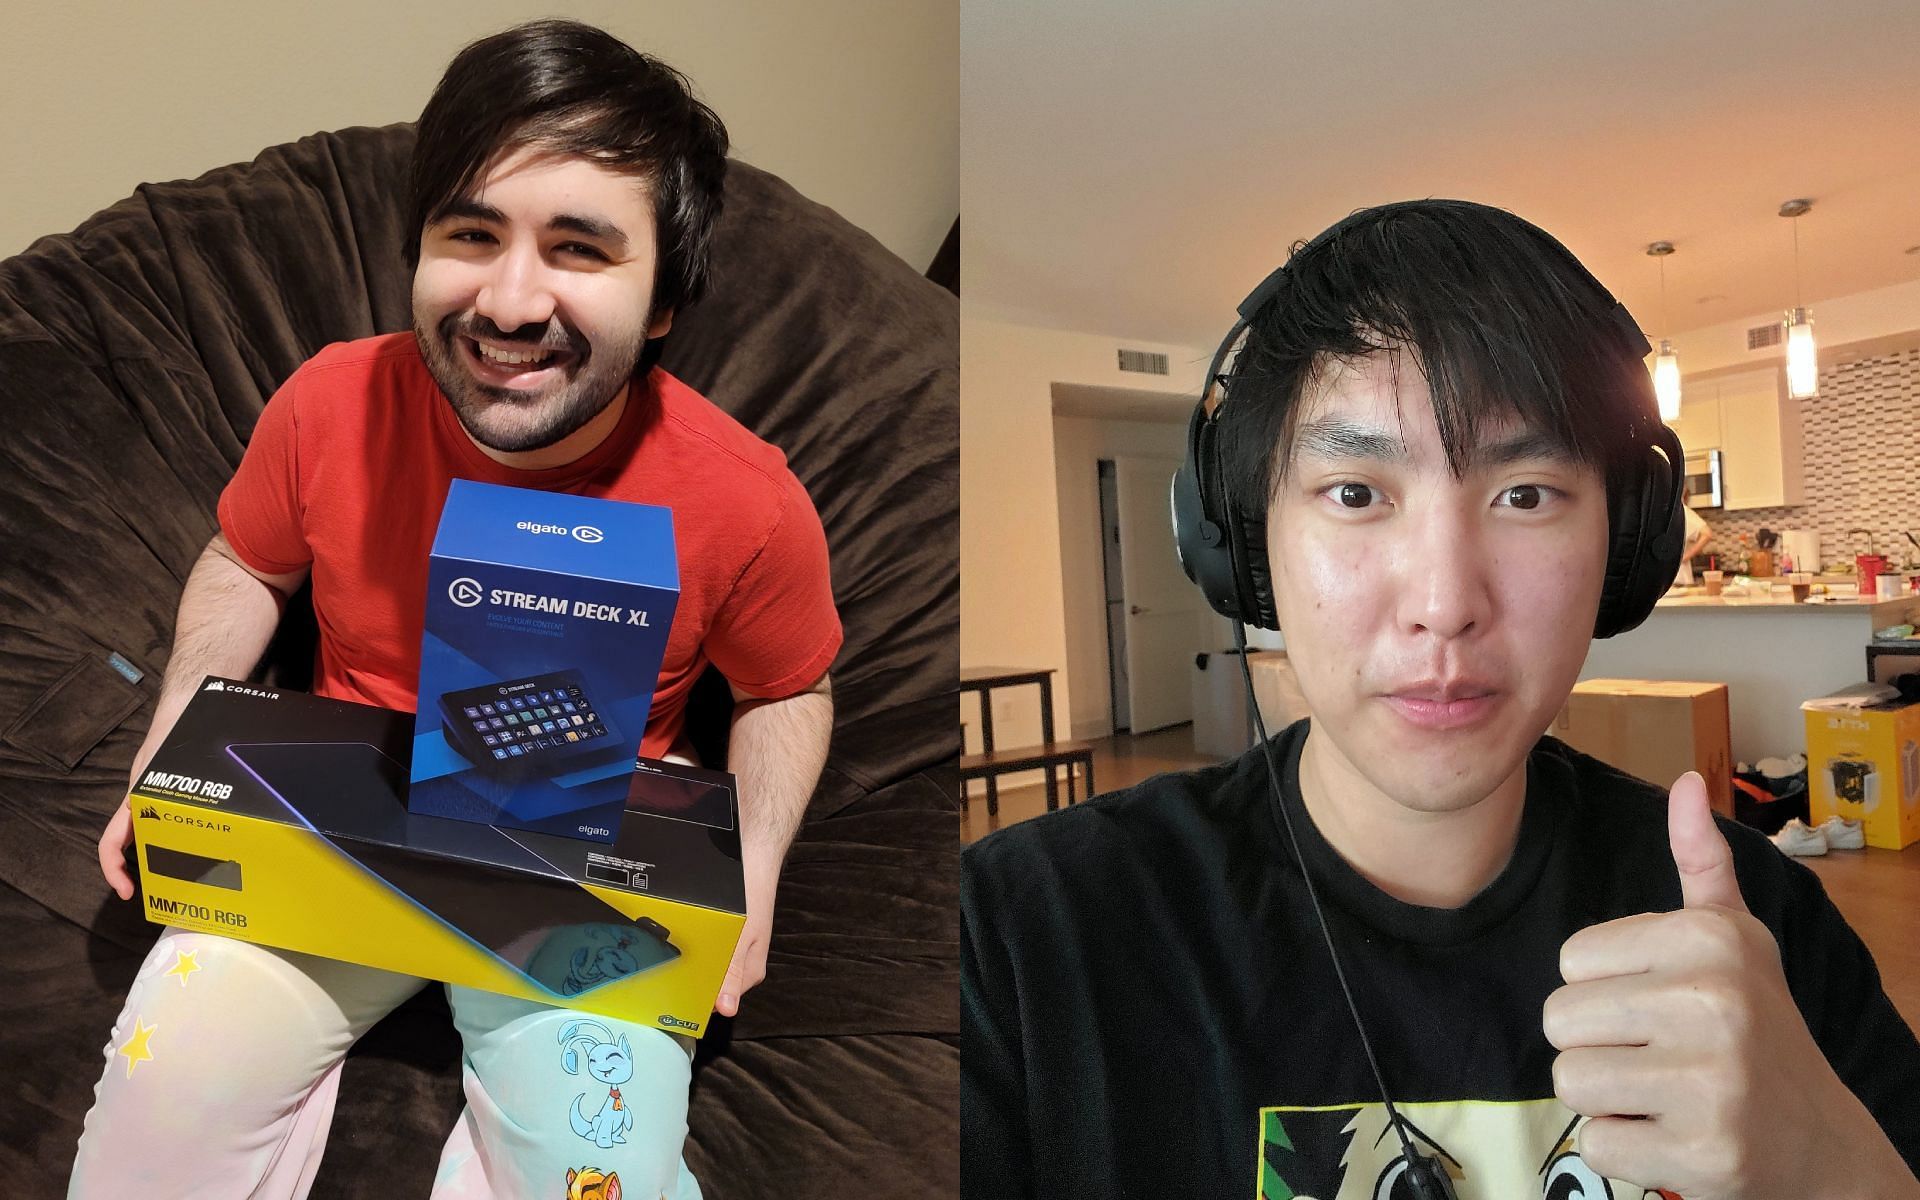 Voyboy surprises Doublelift on stream (Images via Voyboy and Doublelift/Twitter)